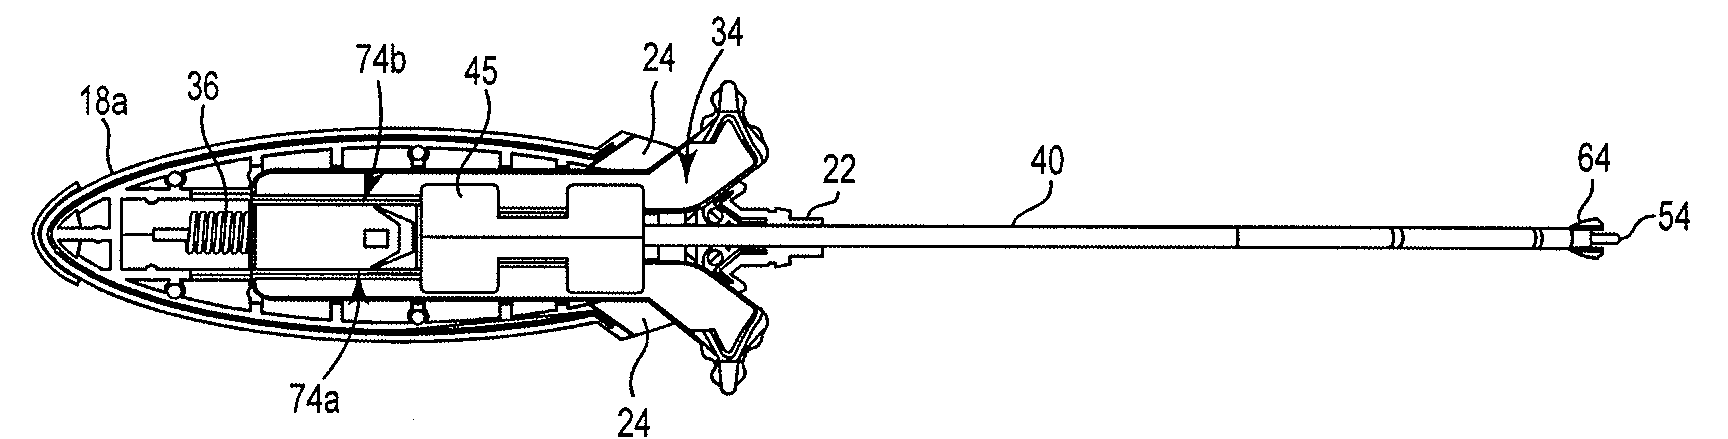 Surgical Needle and Anchor System with Retractable Features